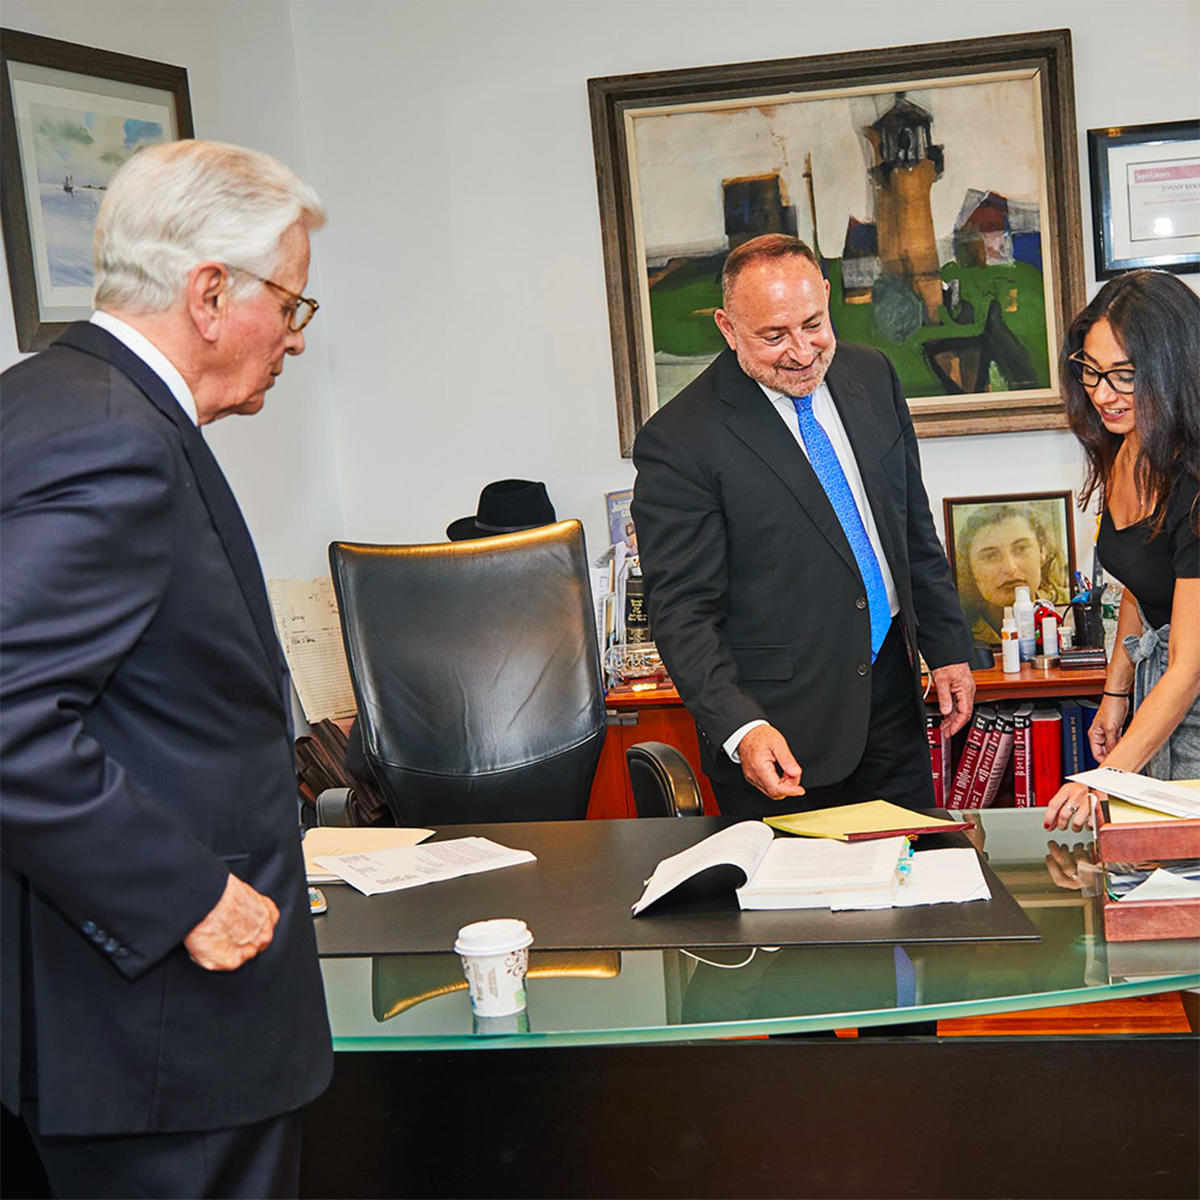 Our personal injury attorneys in NYC have extensive experience handling a variety of injury claims, including medical malpractice cases, municipal liability lawsuits, wrongful death claims & vehicle accident cases. We take the time to develop a personalized attorney-client relationship so we can best understand each client’s needs & circumstances. If you have suffered an injury due to another’s negligence, seek the counsel of our New York attorneys.